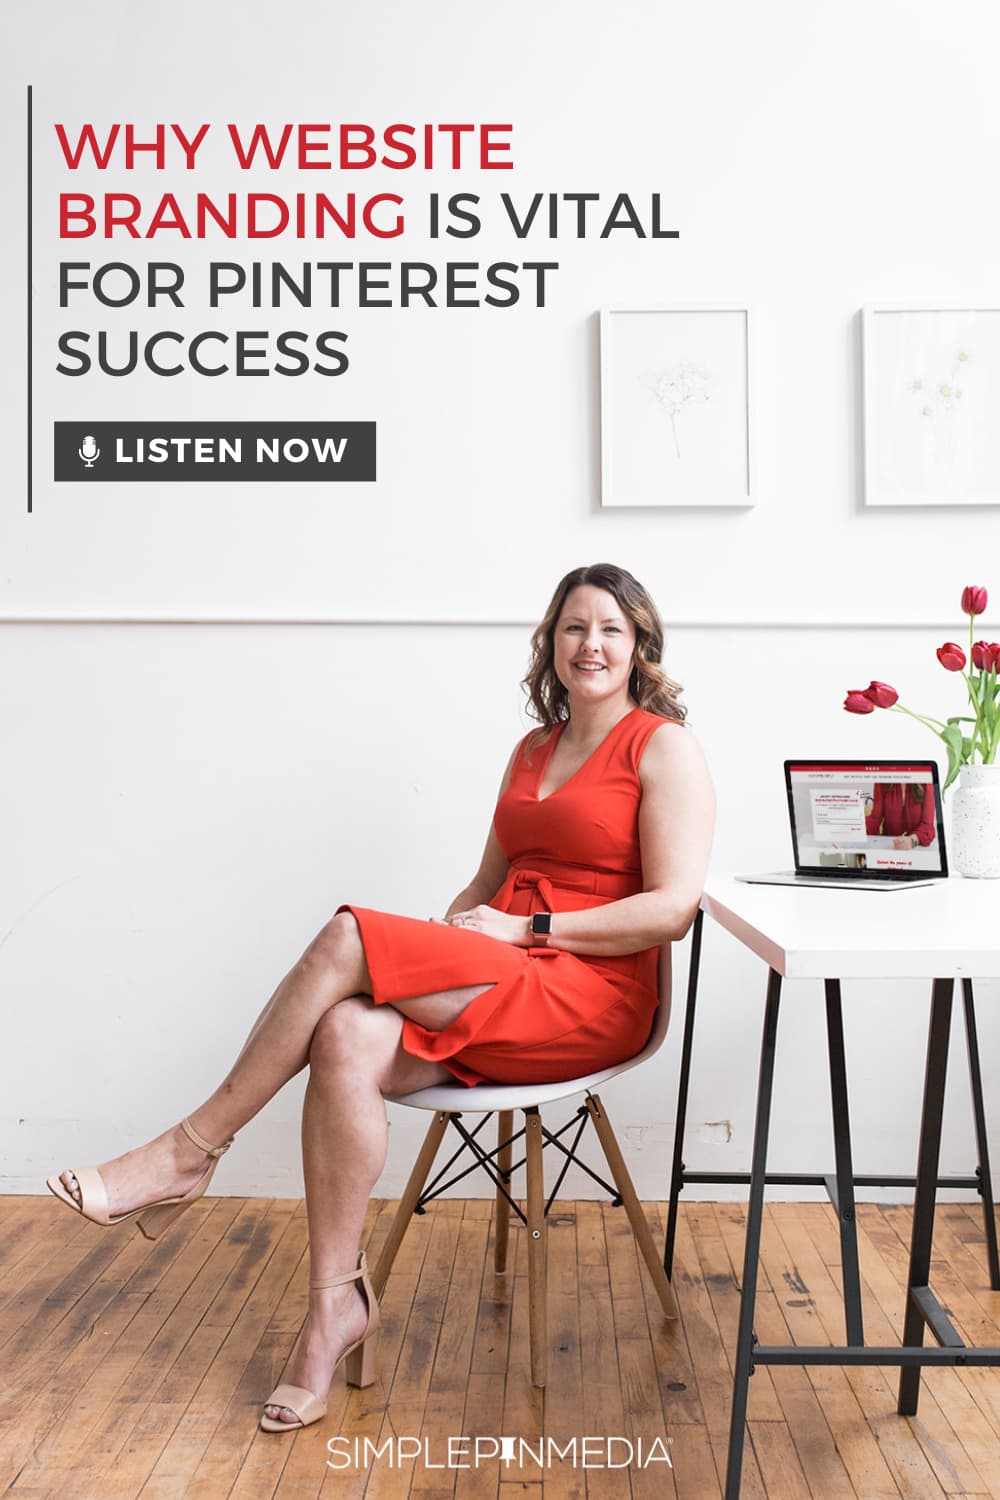 Kate Ahl in red dress sitting at desk - text "Why Website Branding is vital for Pinterest Success".